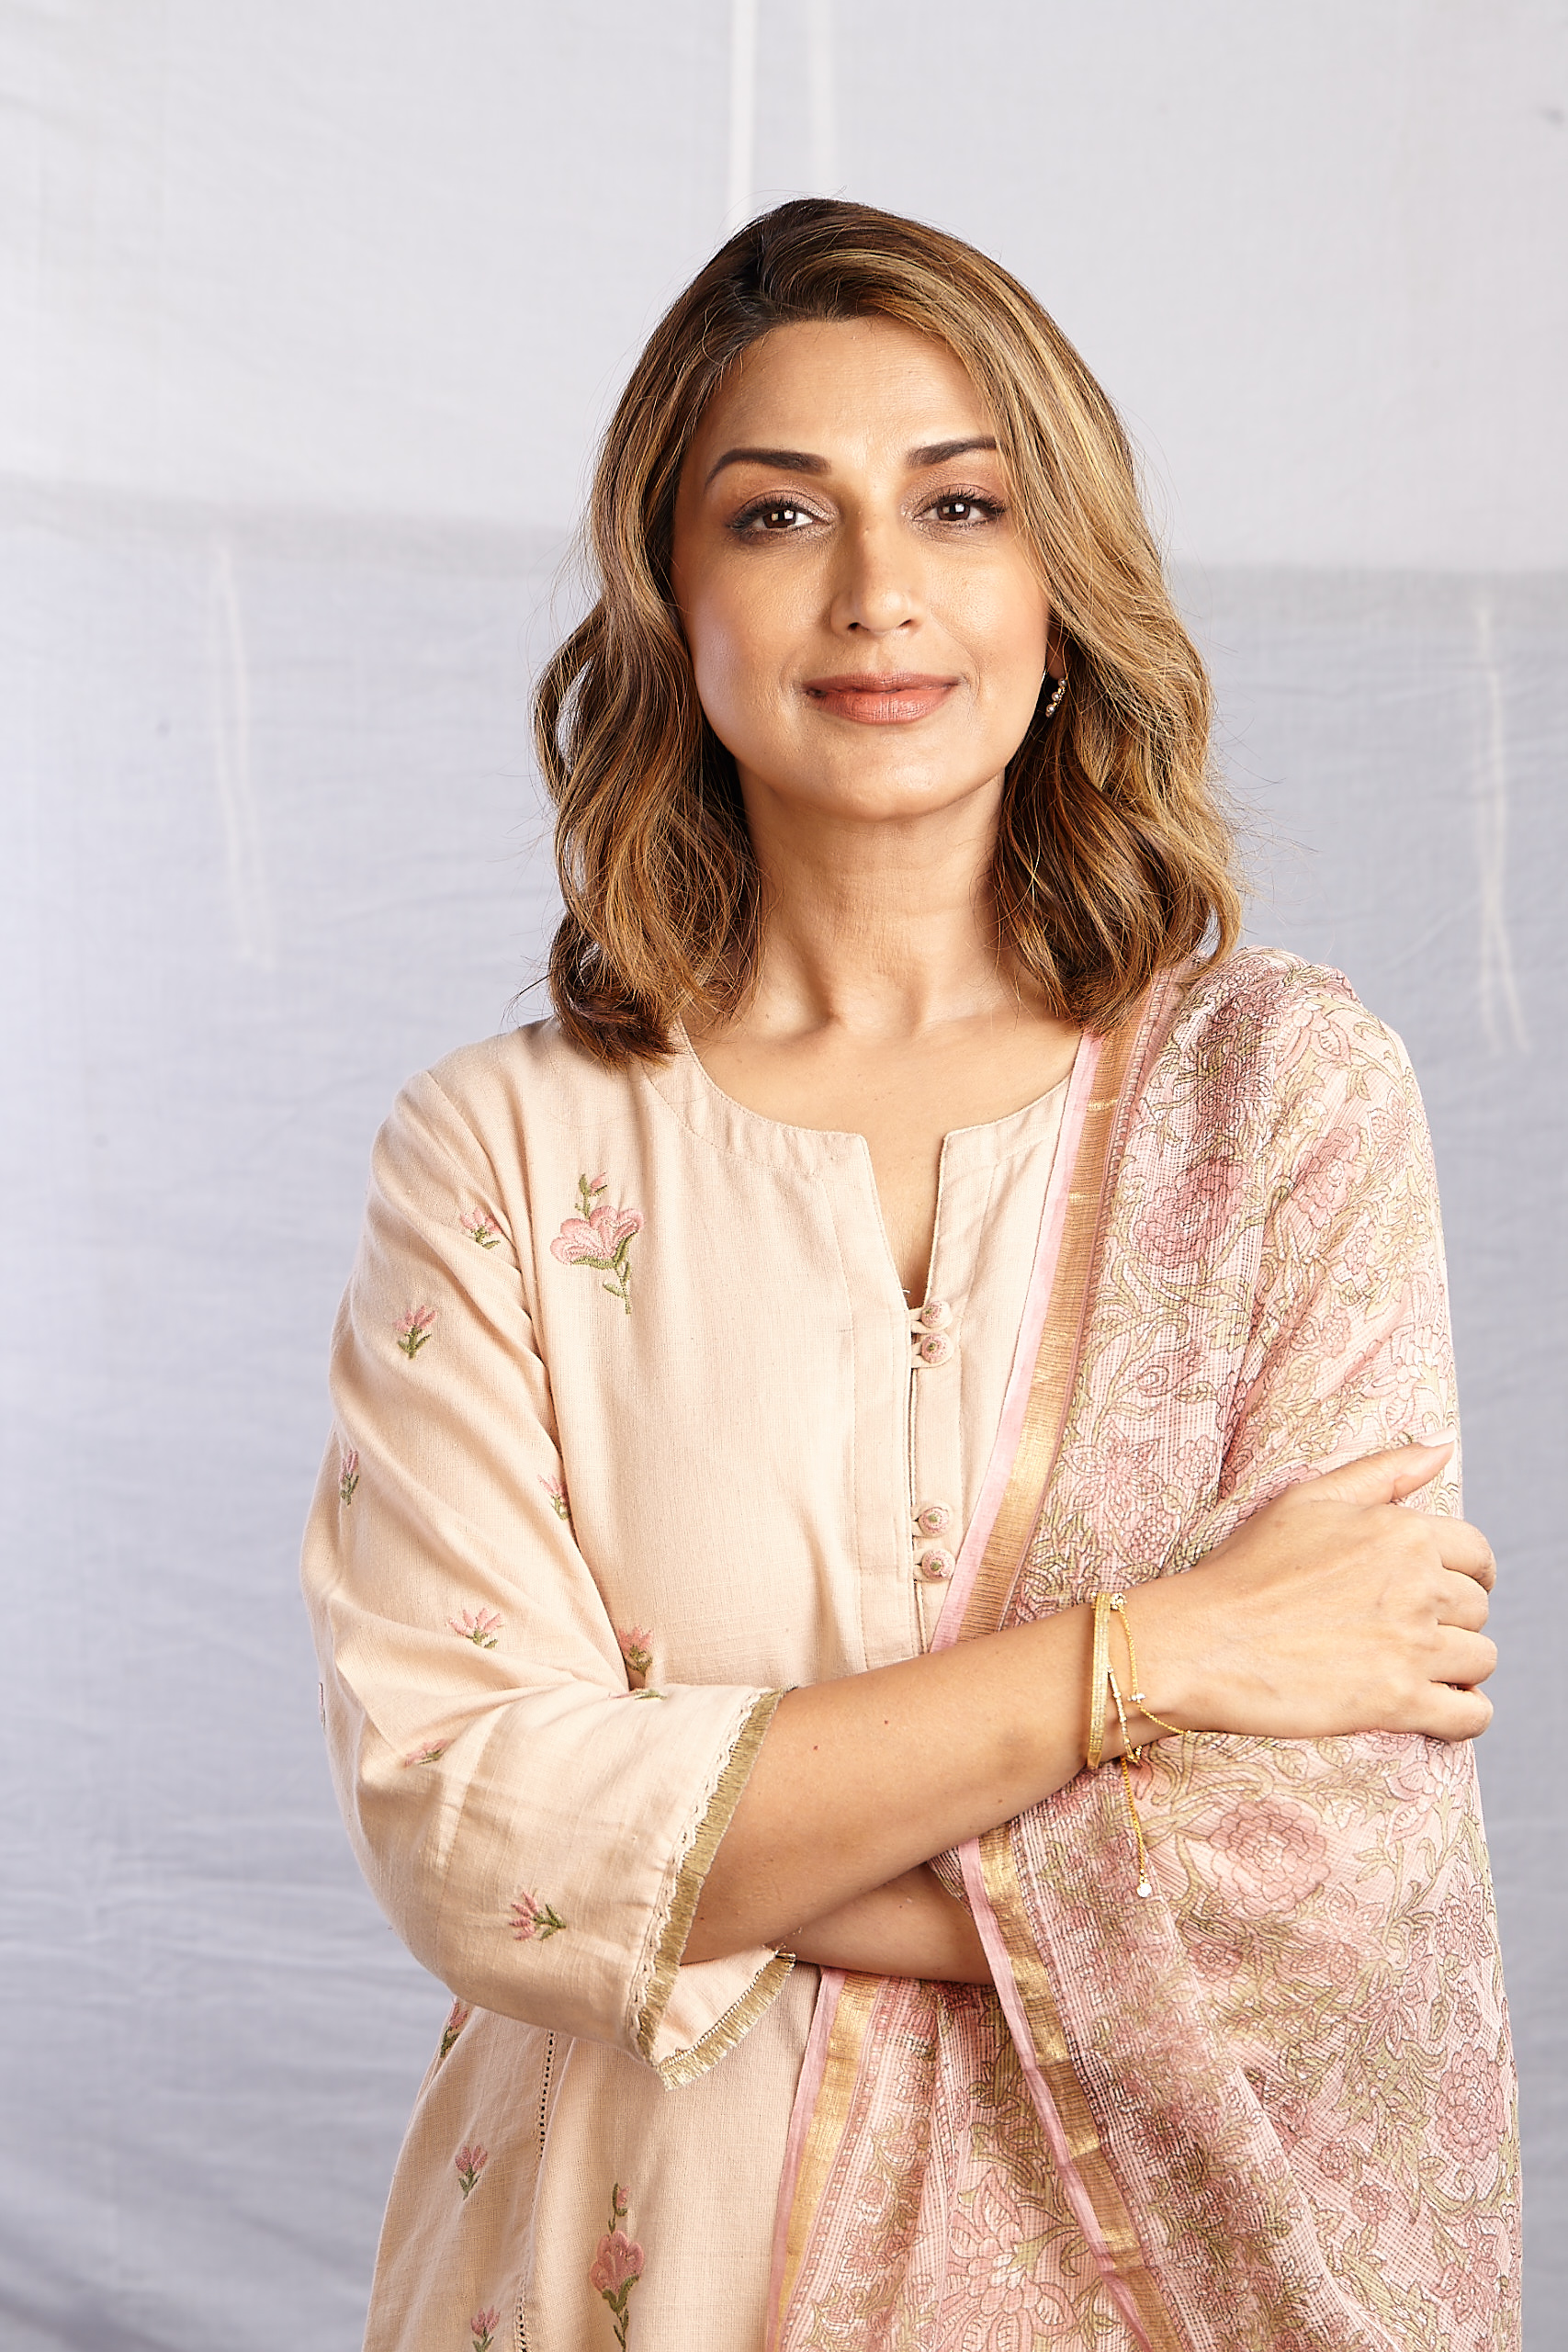 Sonali Bendre to make OTT debut with ‘The Broken News’